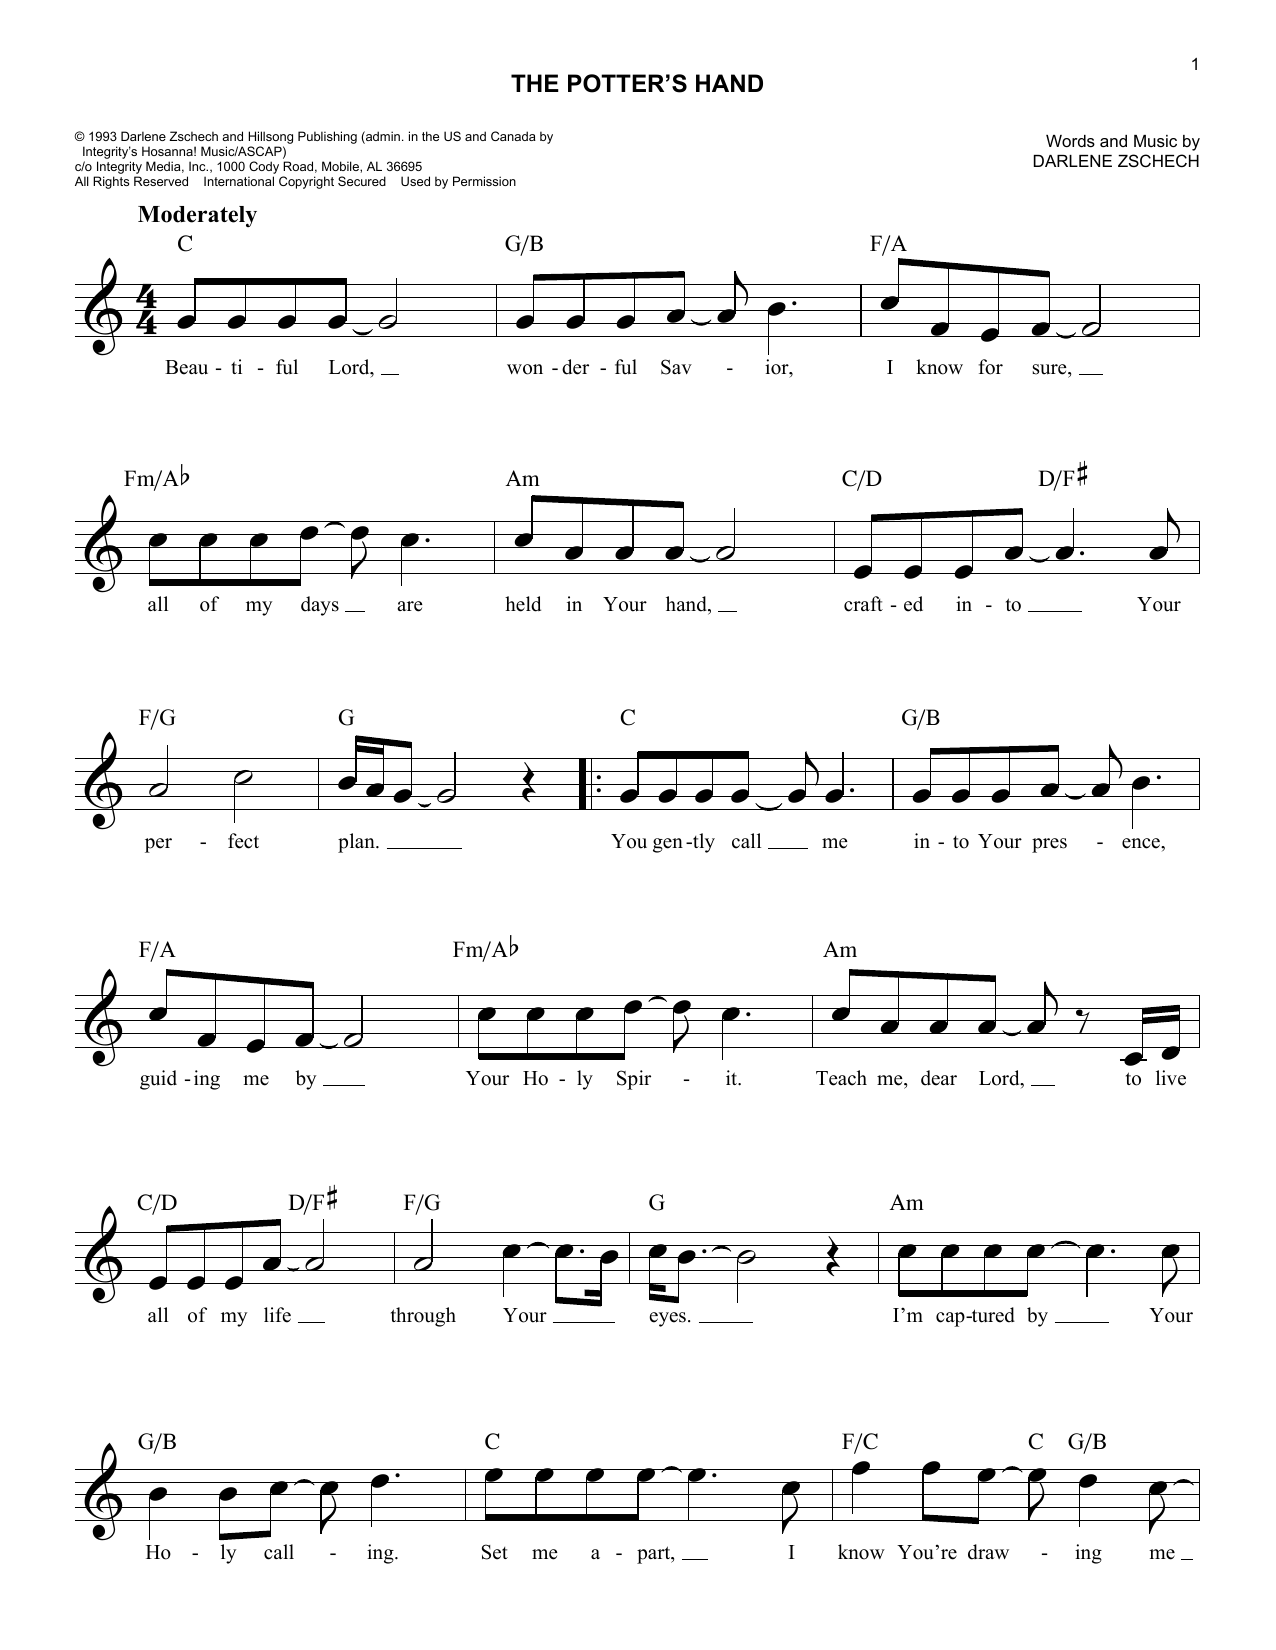 Darlene Zschech The Potter's Hand sheet music notes printable PDF score